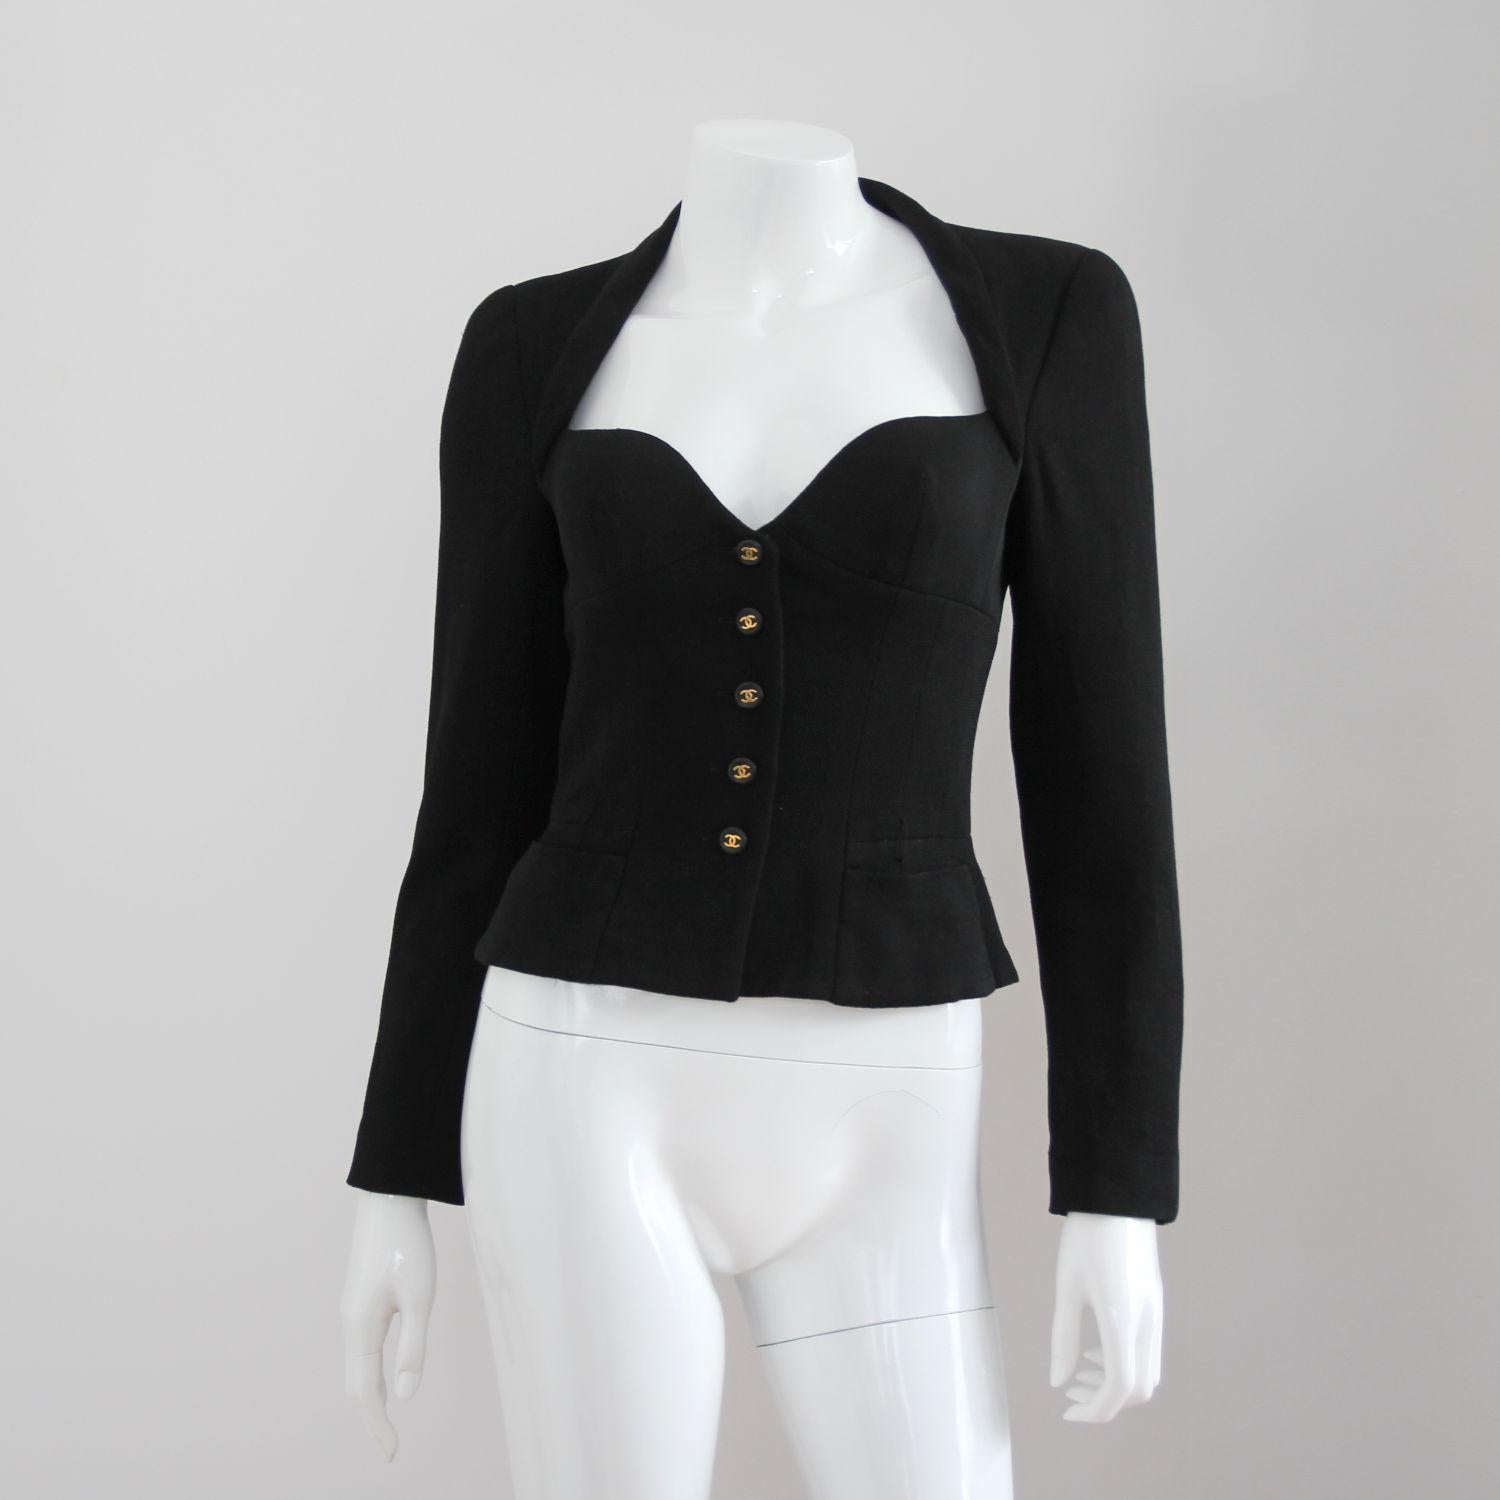 CHANEL 1995 Black Jacket with Patent Leather Belt & CC Buttons by Karl Lagerfeld 3